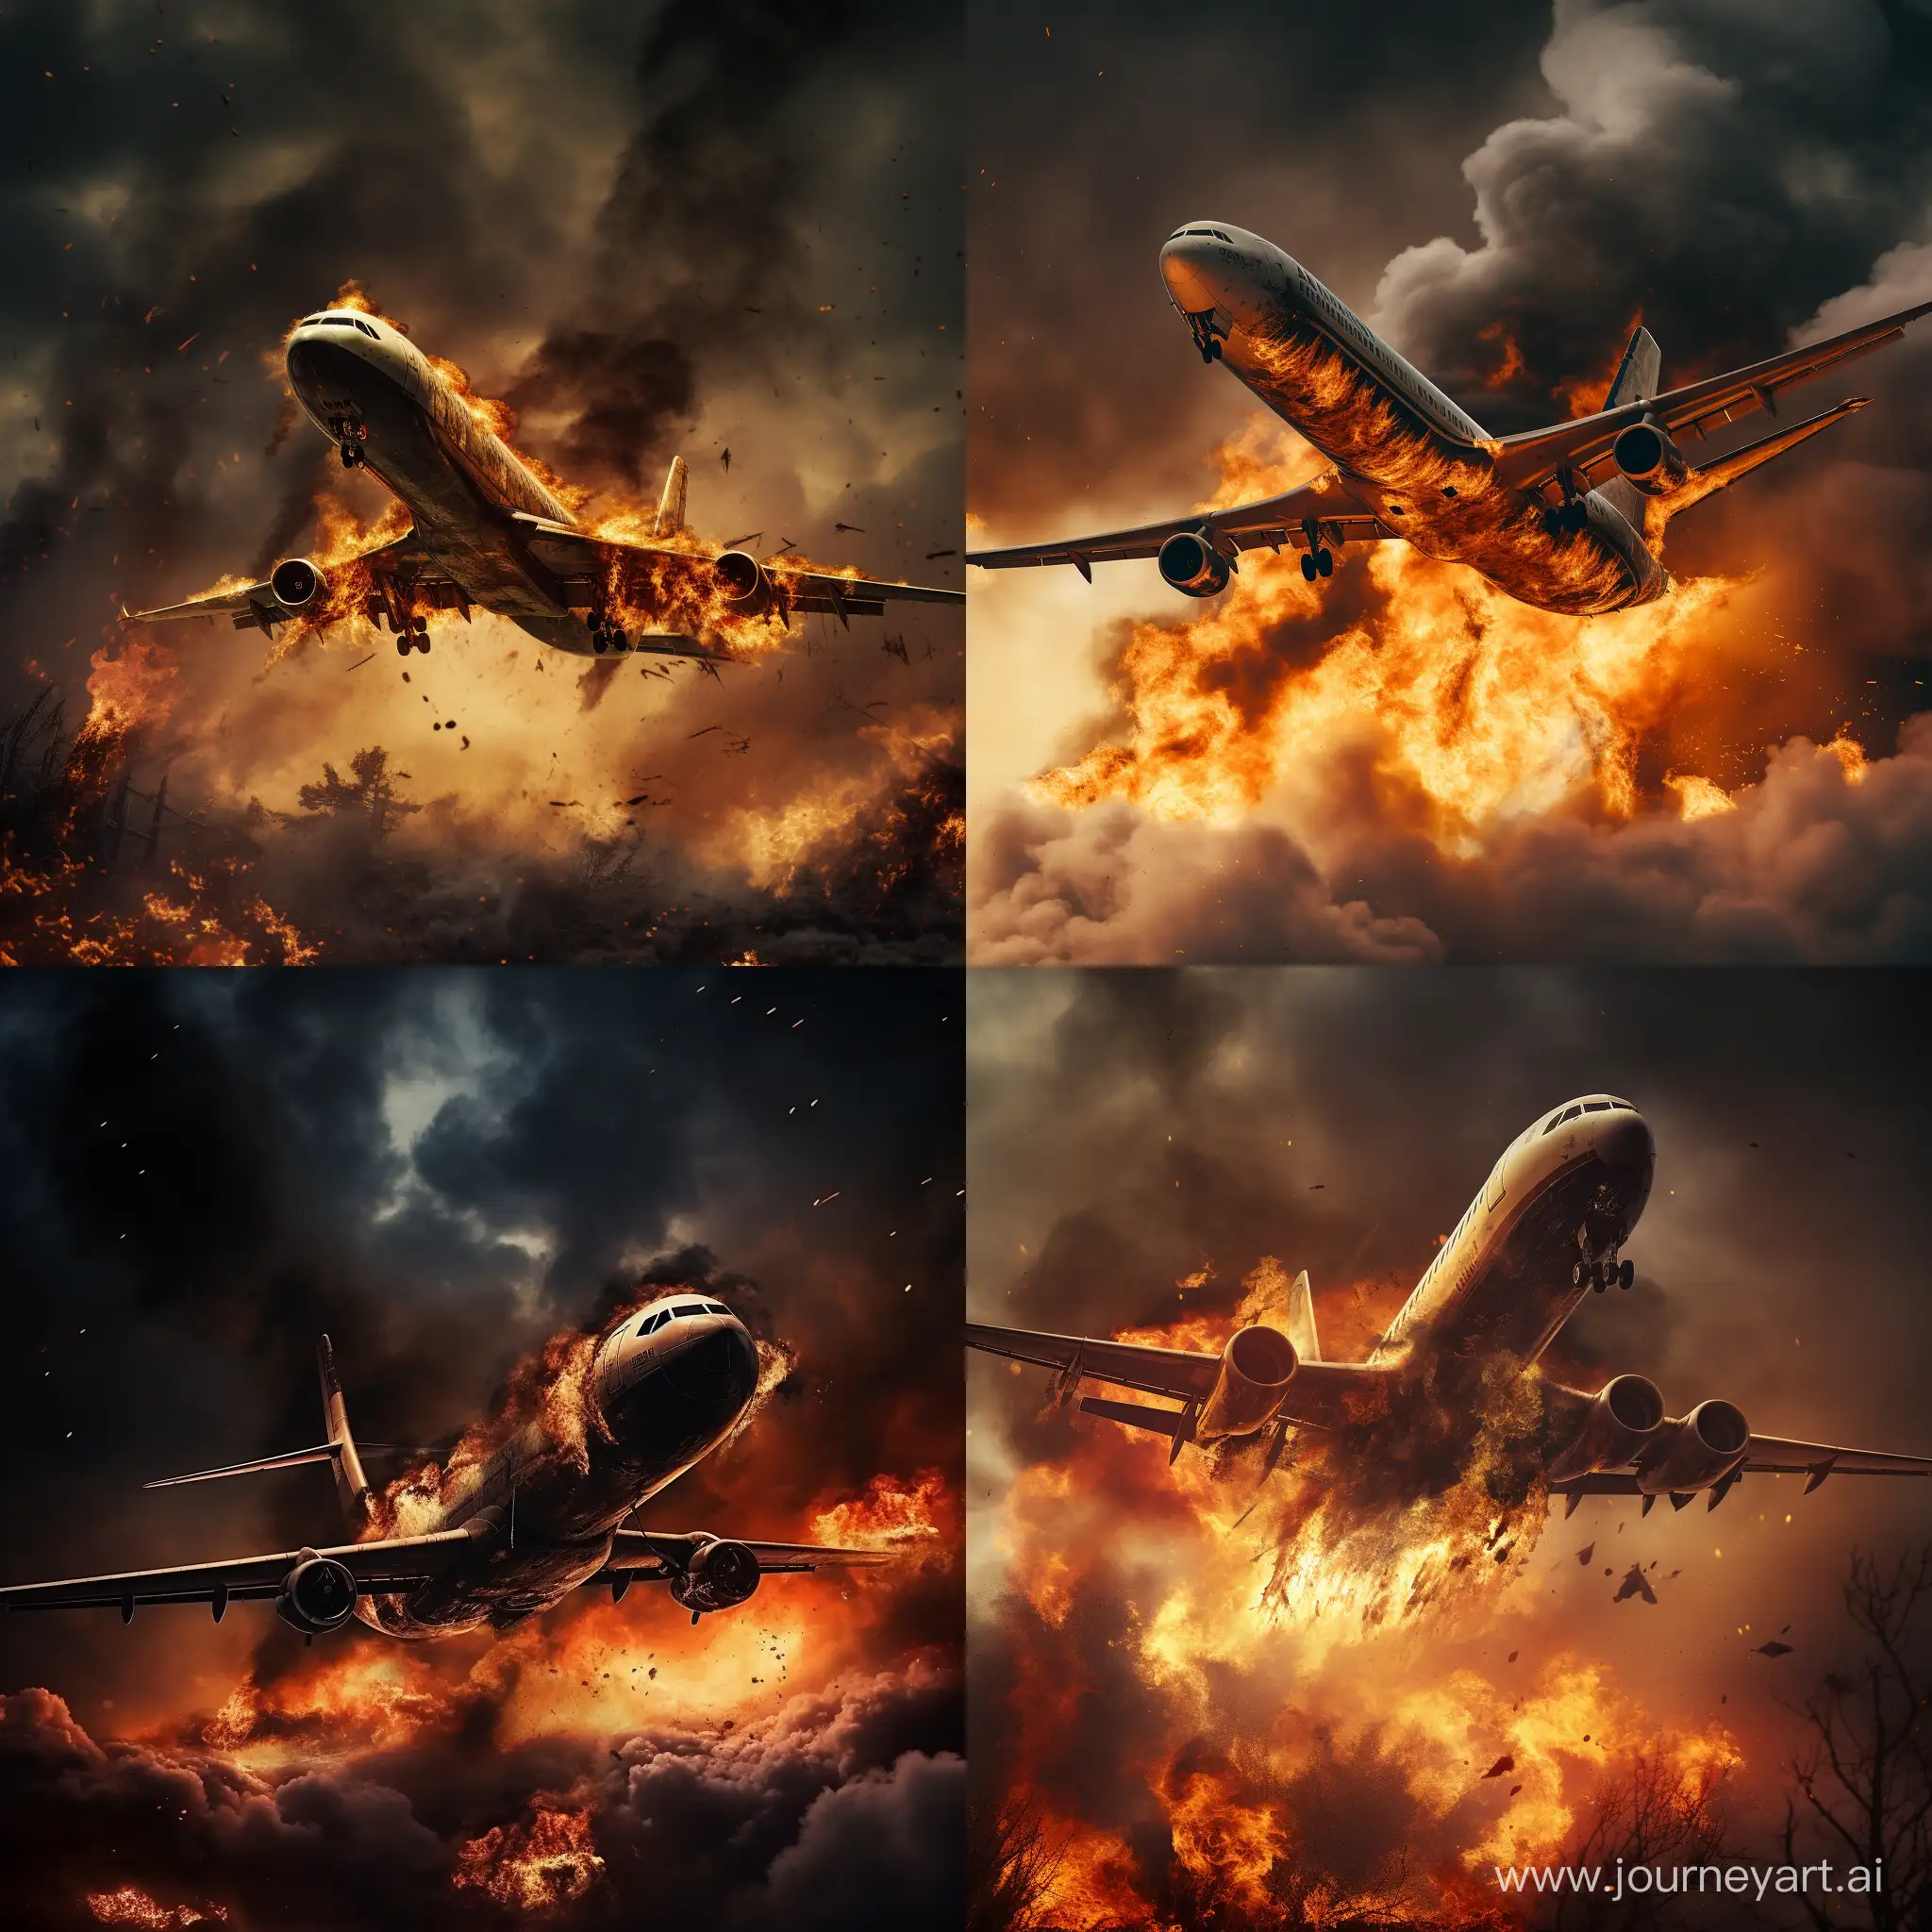 Dramatic-Plane-Crash-Scene-Aircraft-Plunging-and-Engulfed-in-Flames